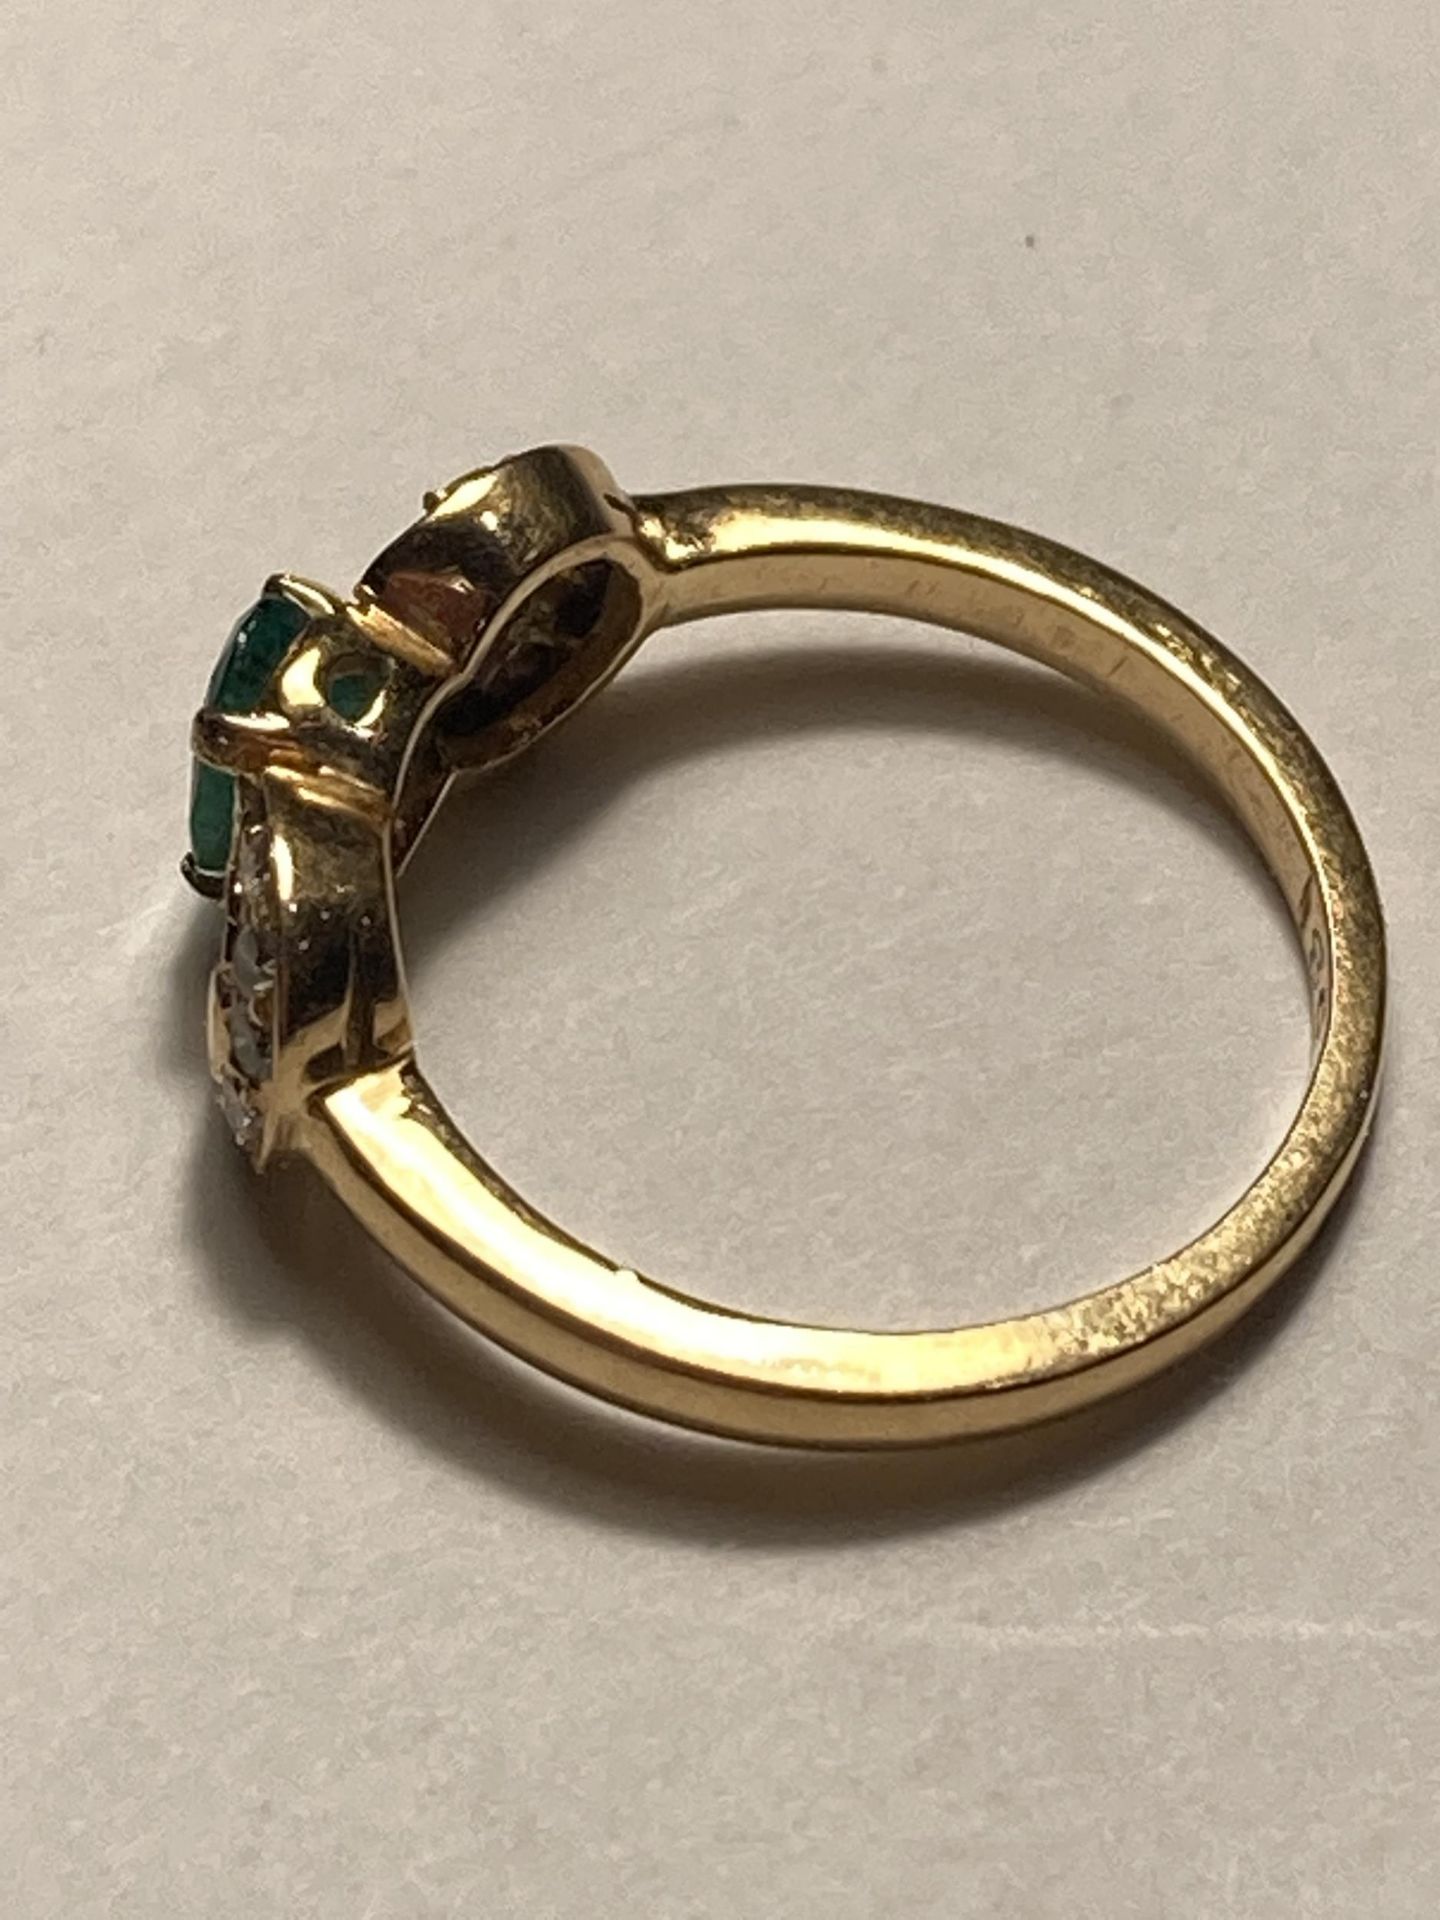 A 18 CARAT GOLD RING WITH A CENTRE GREEN STONE AND DIAMONDS SIZE J/K - Image 2 of 3